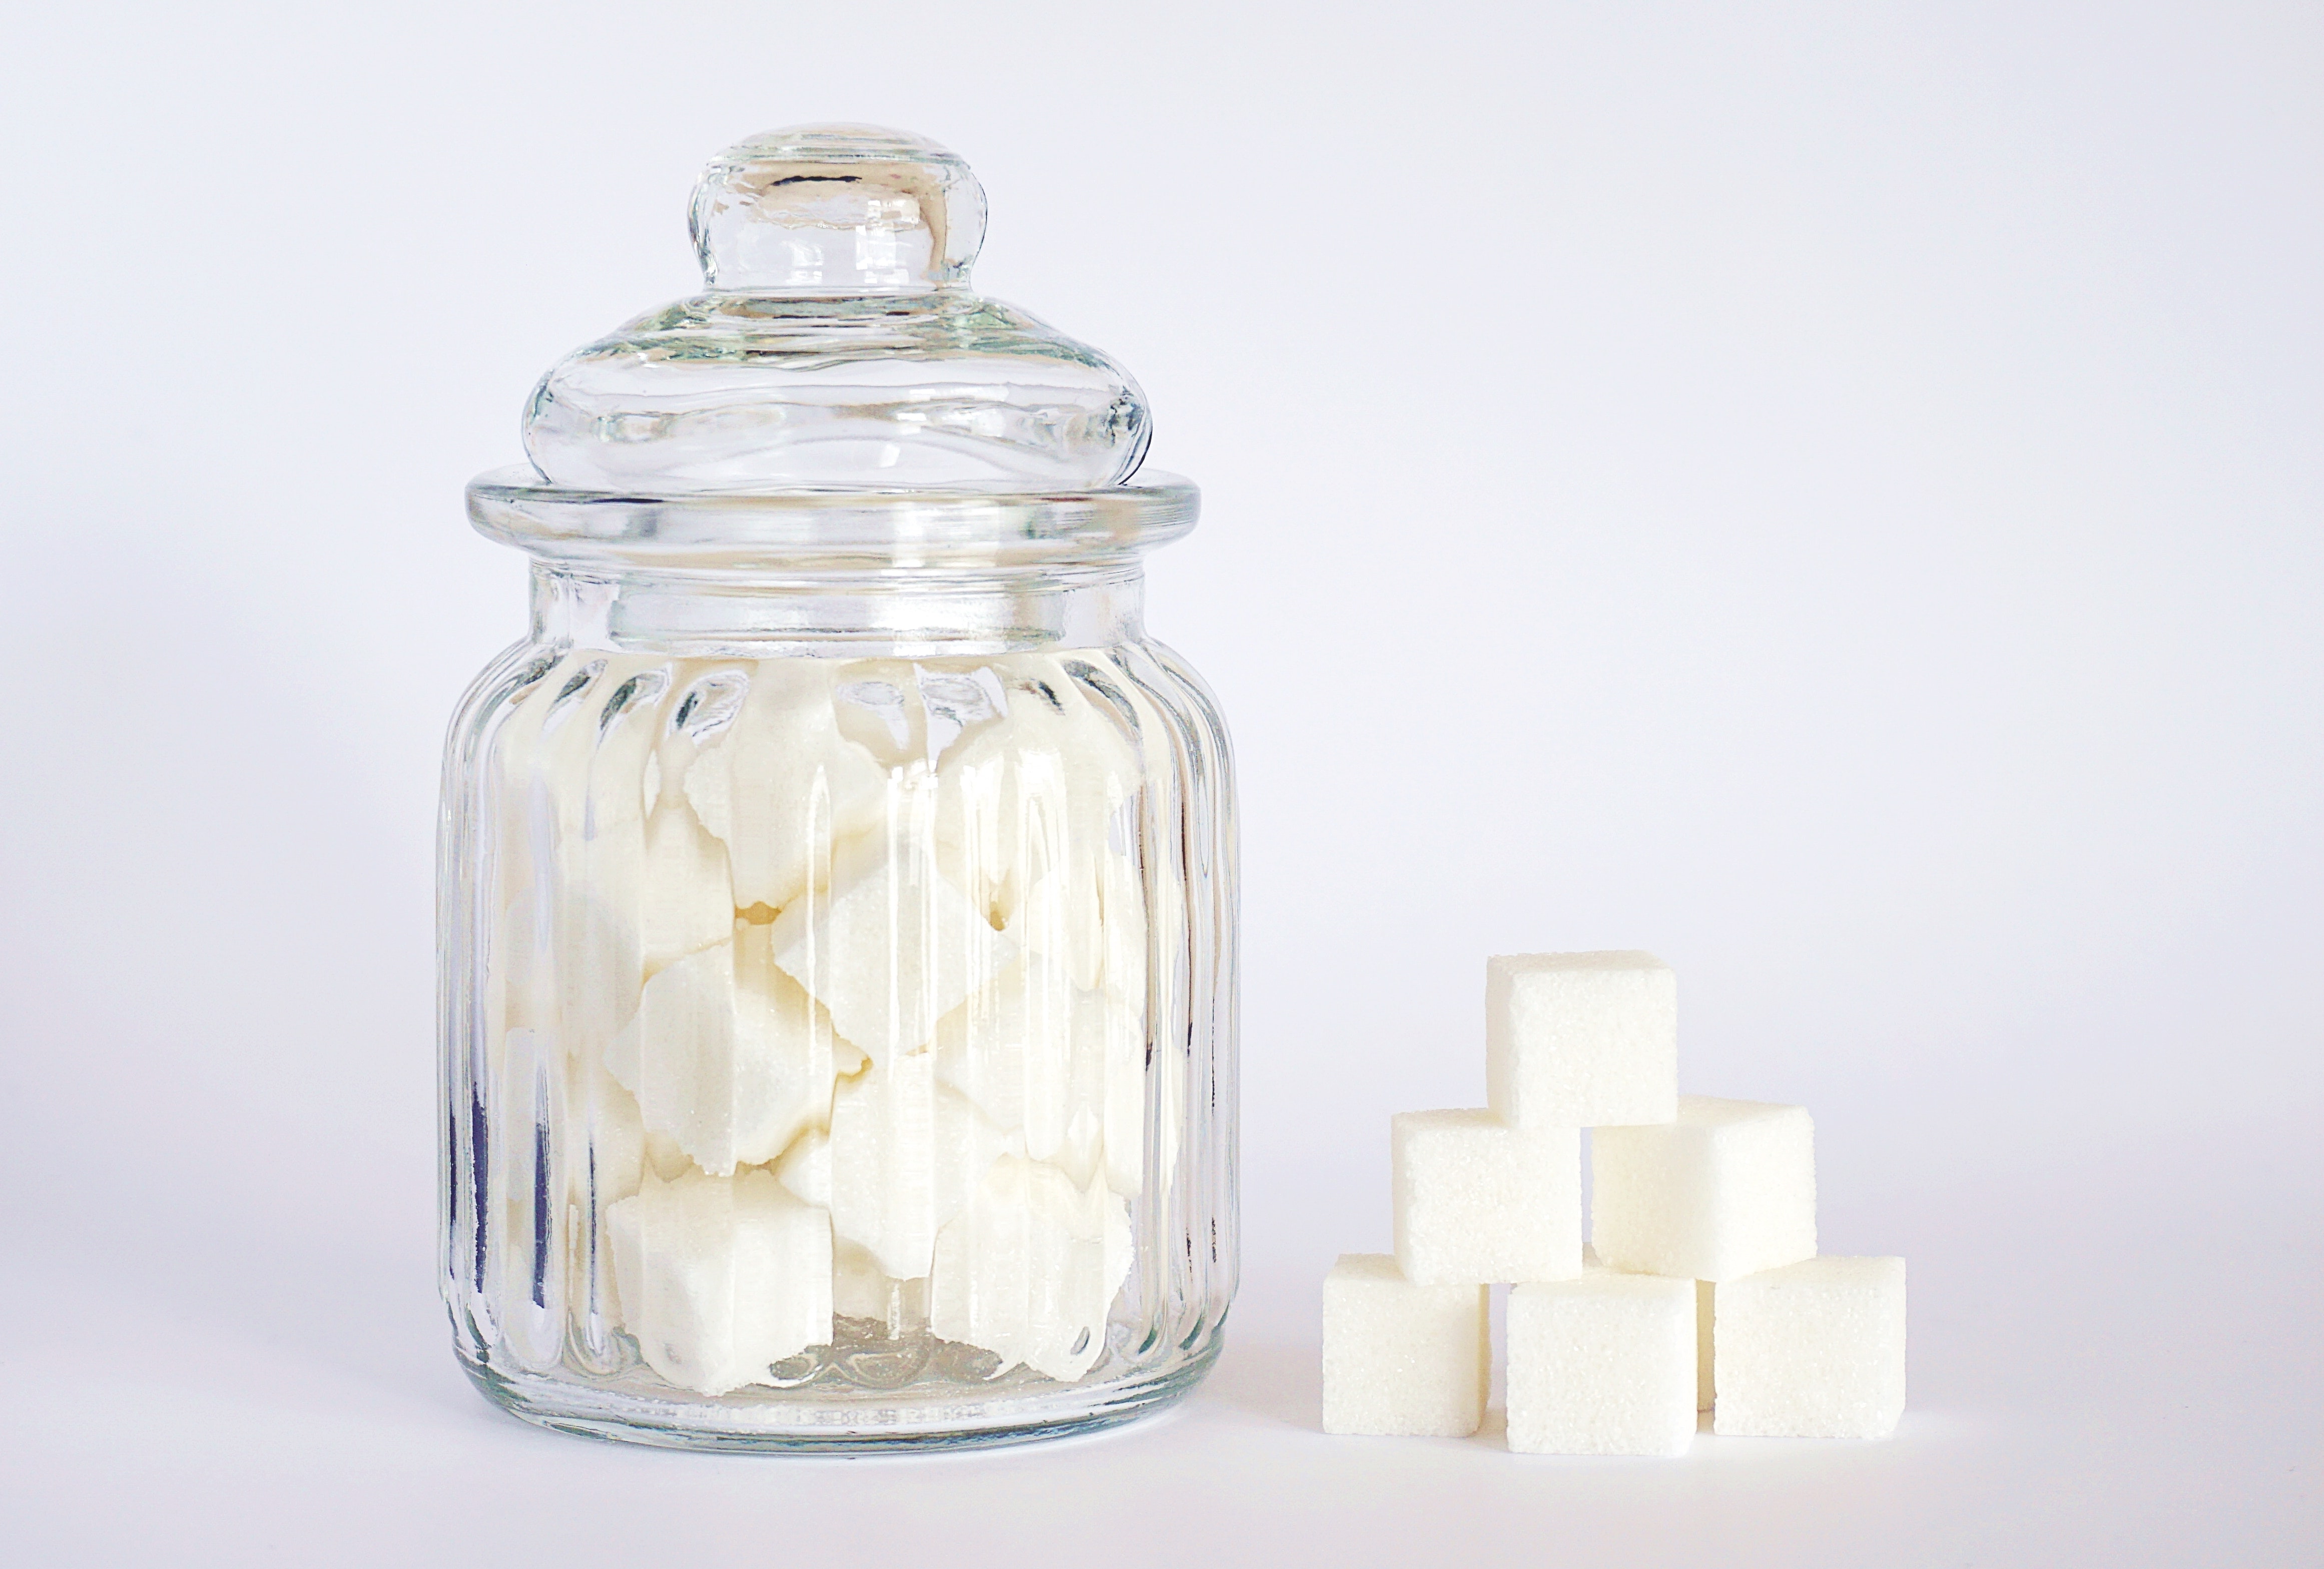 Why I Stopped Eating Sugar and Why You Should Too